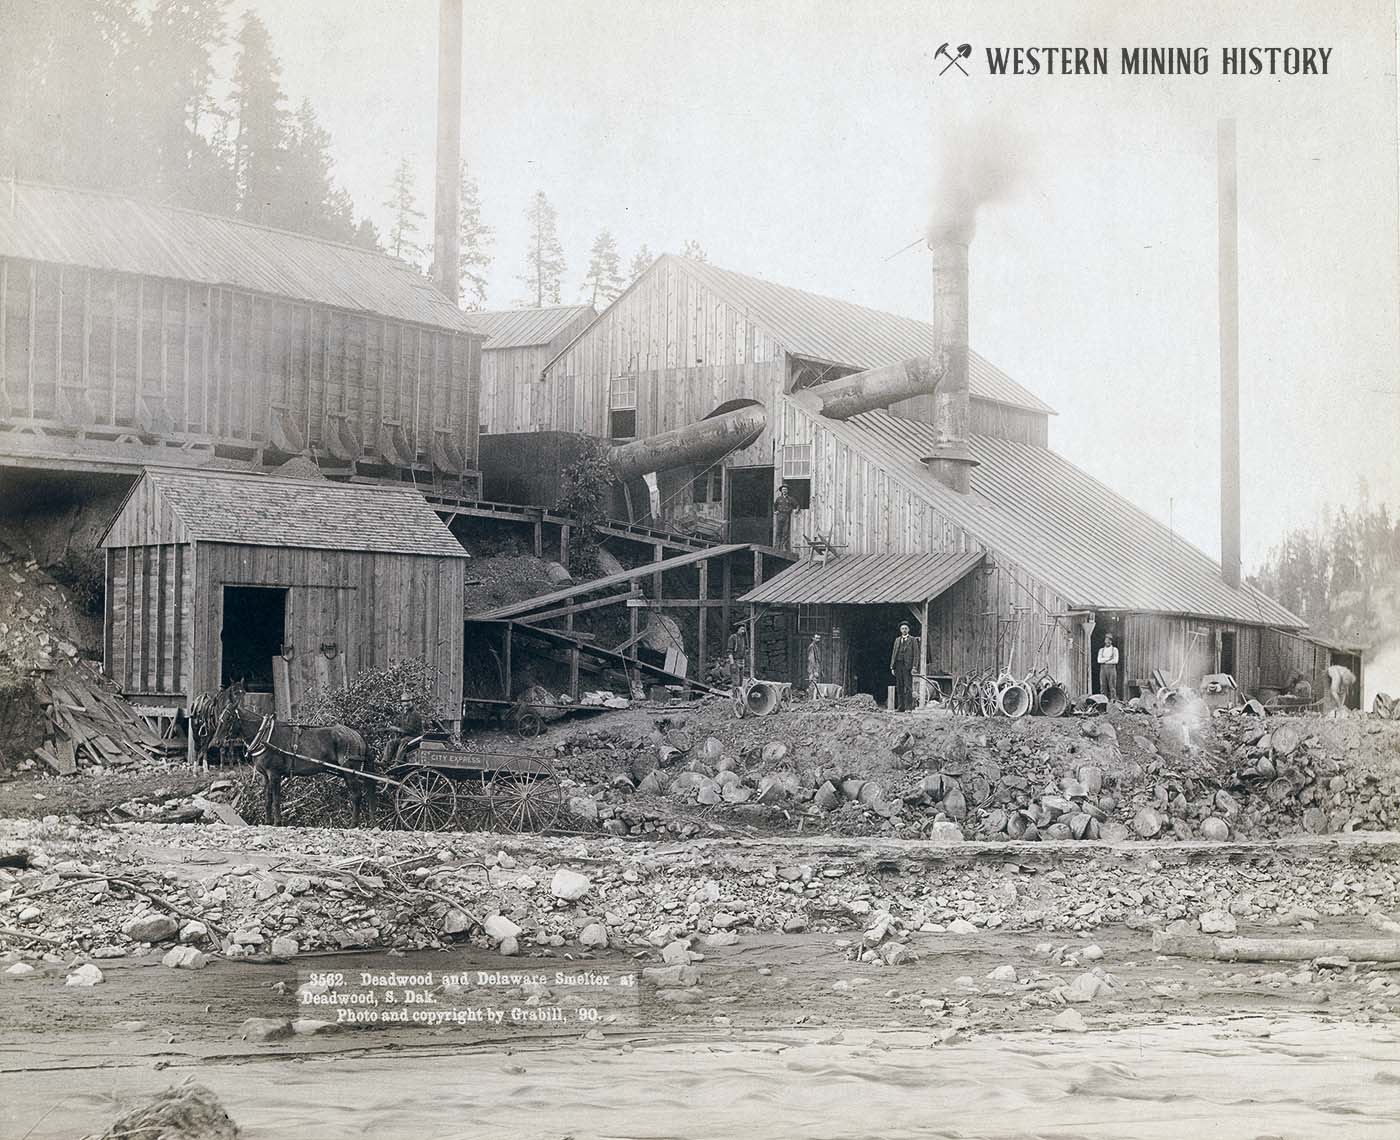 Deadwood and Delaware Smelter at Deadwood